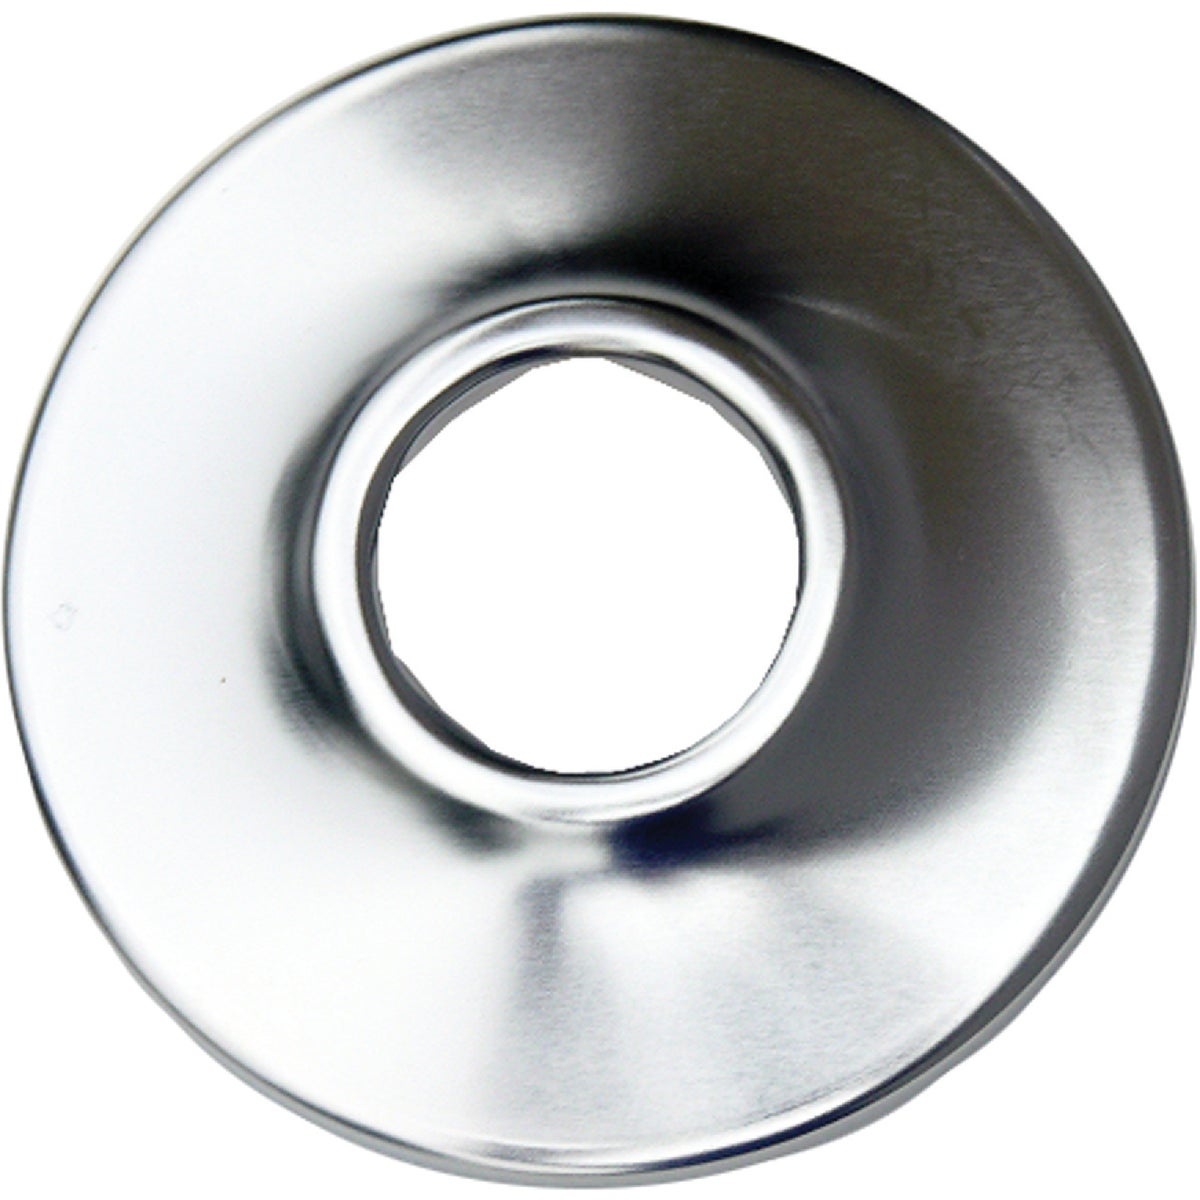 Lasco 3/4 In. IP or 1 In. Copper Chrome Plated Flange